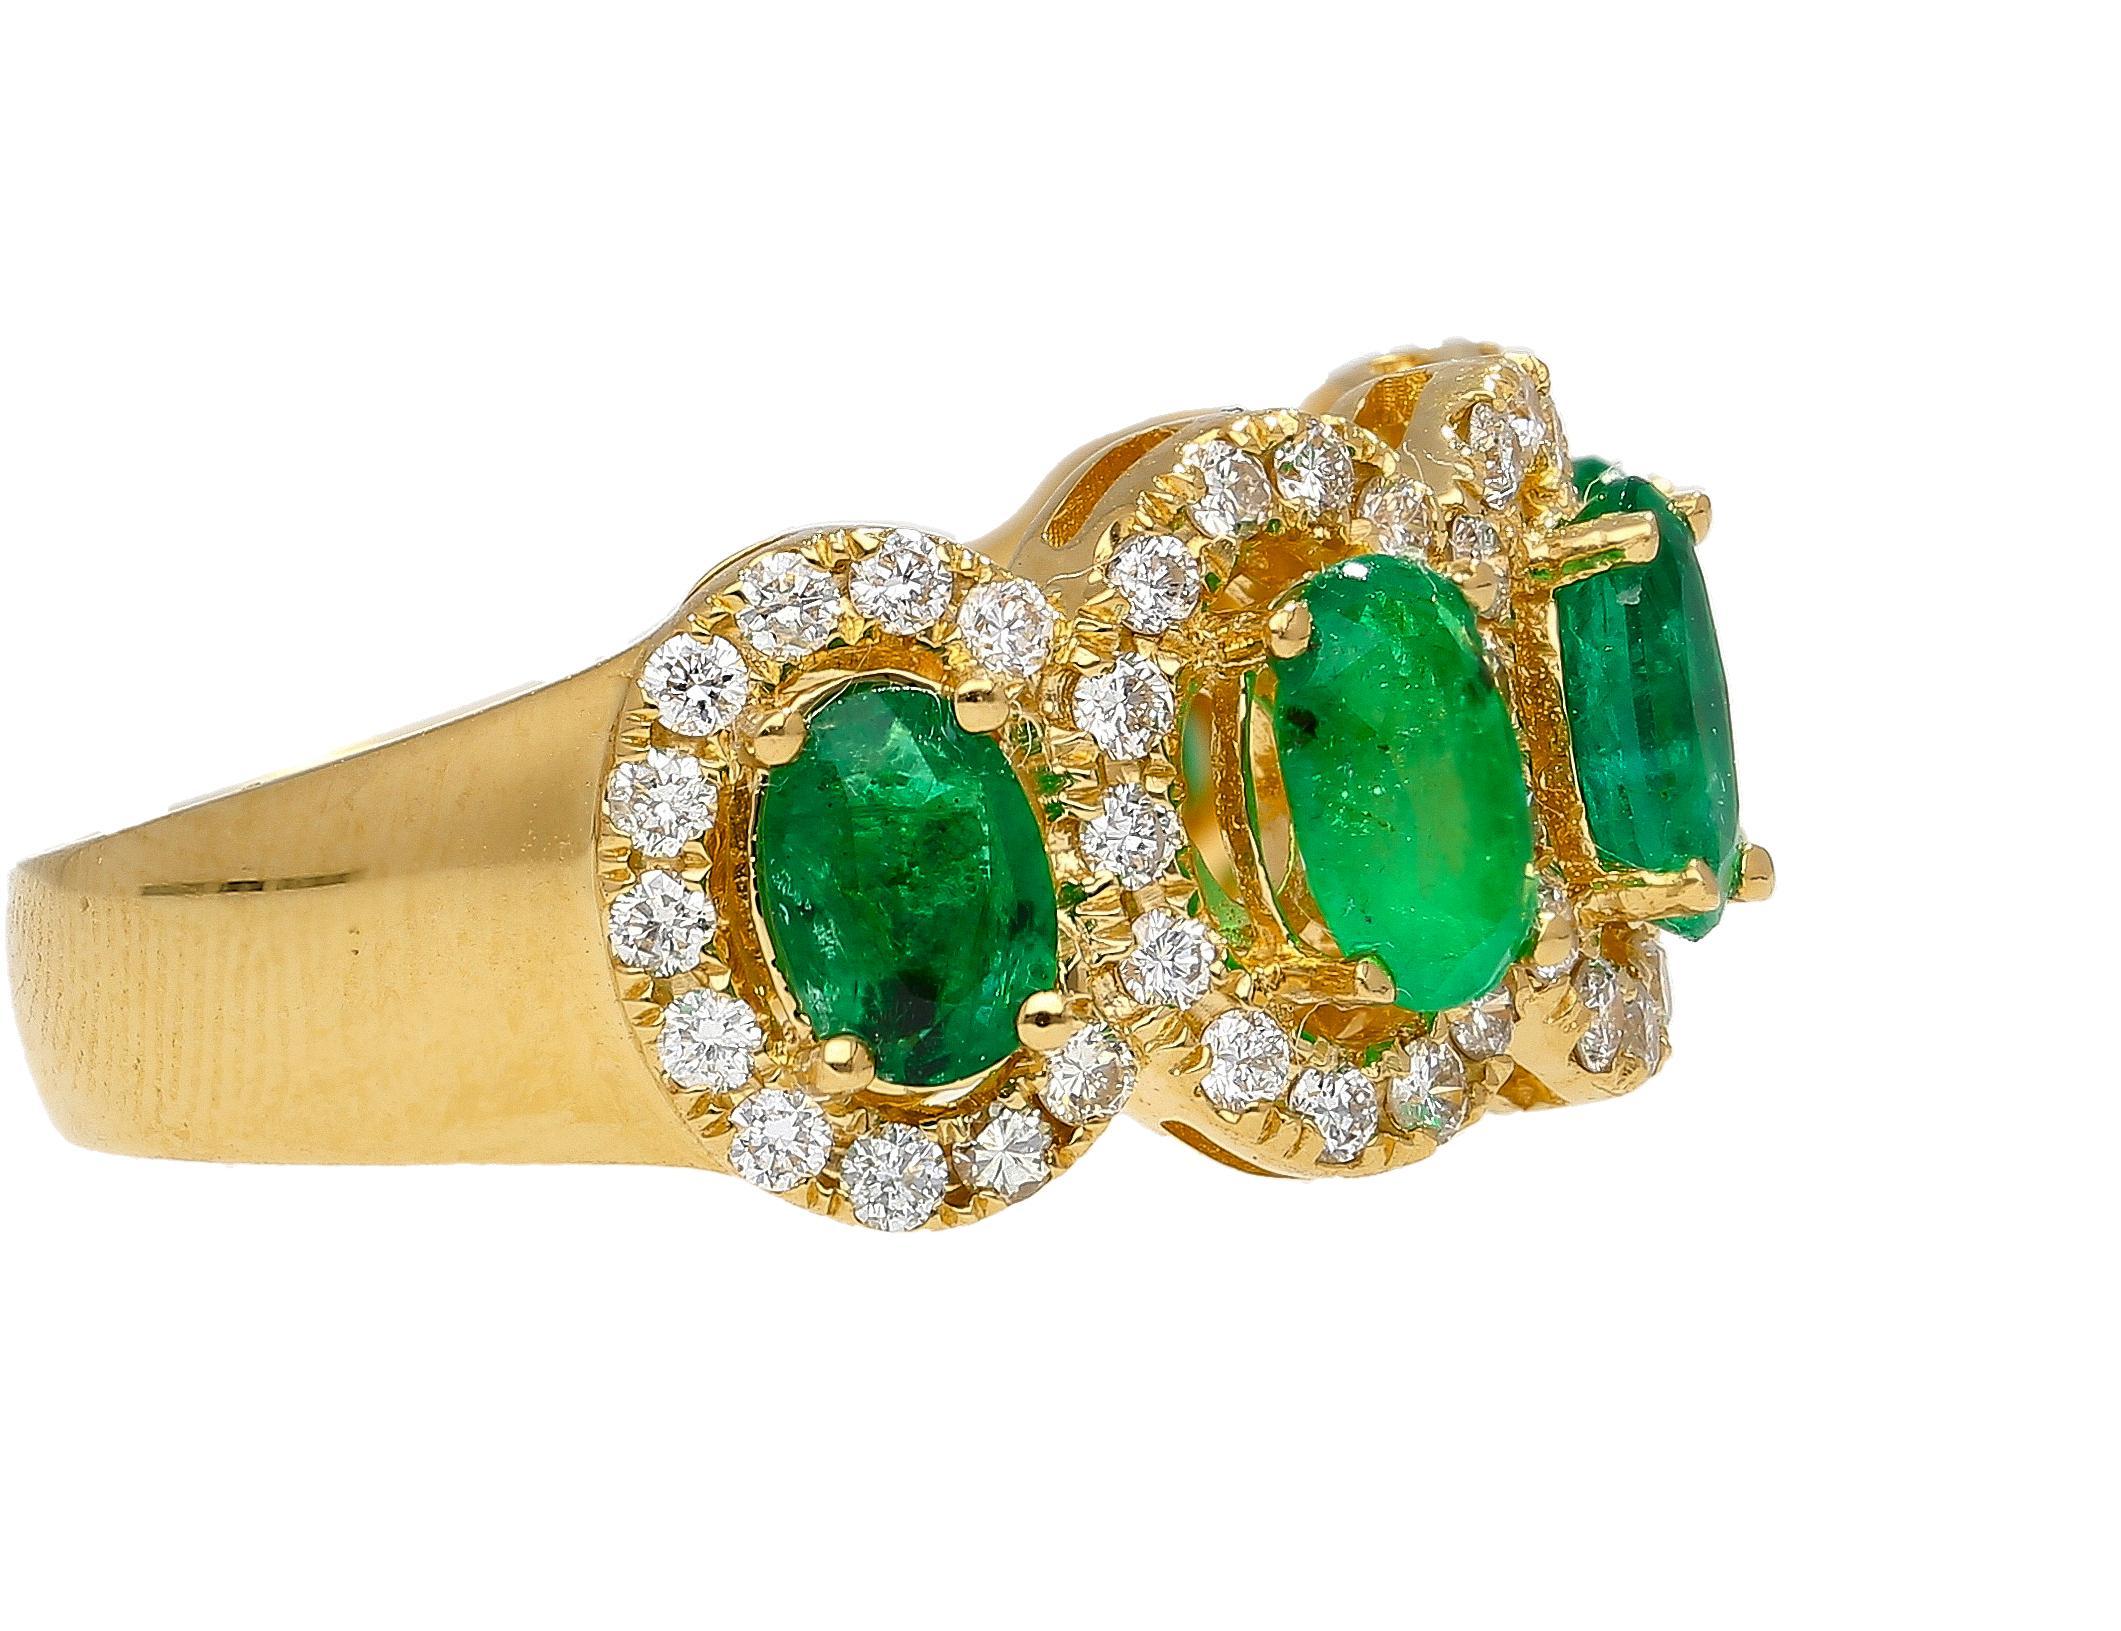 2.29 Carat Oval Cut Emerald and Diamond Wedding Band in 18K Gold In New Condition For Sale In Miami, FL